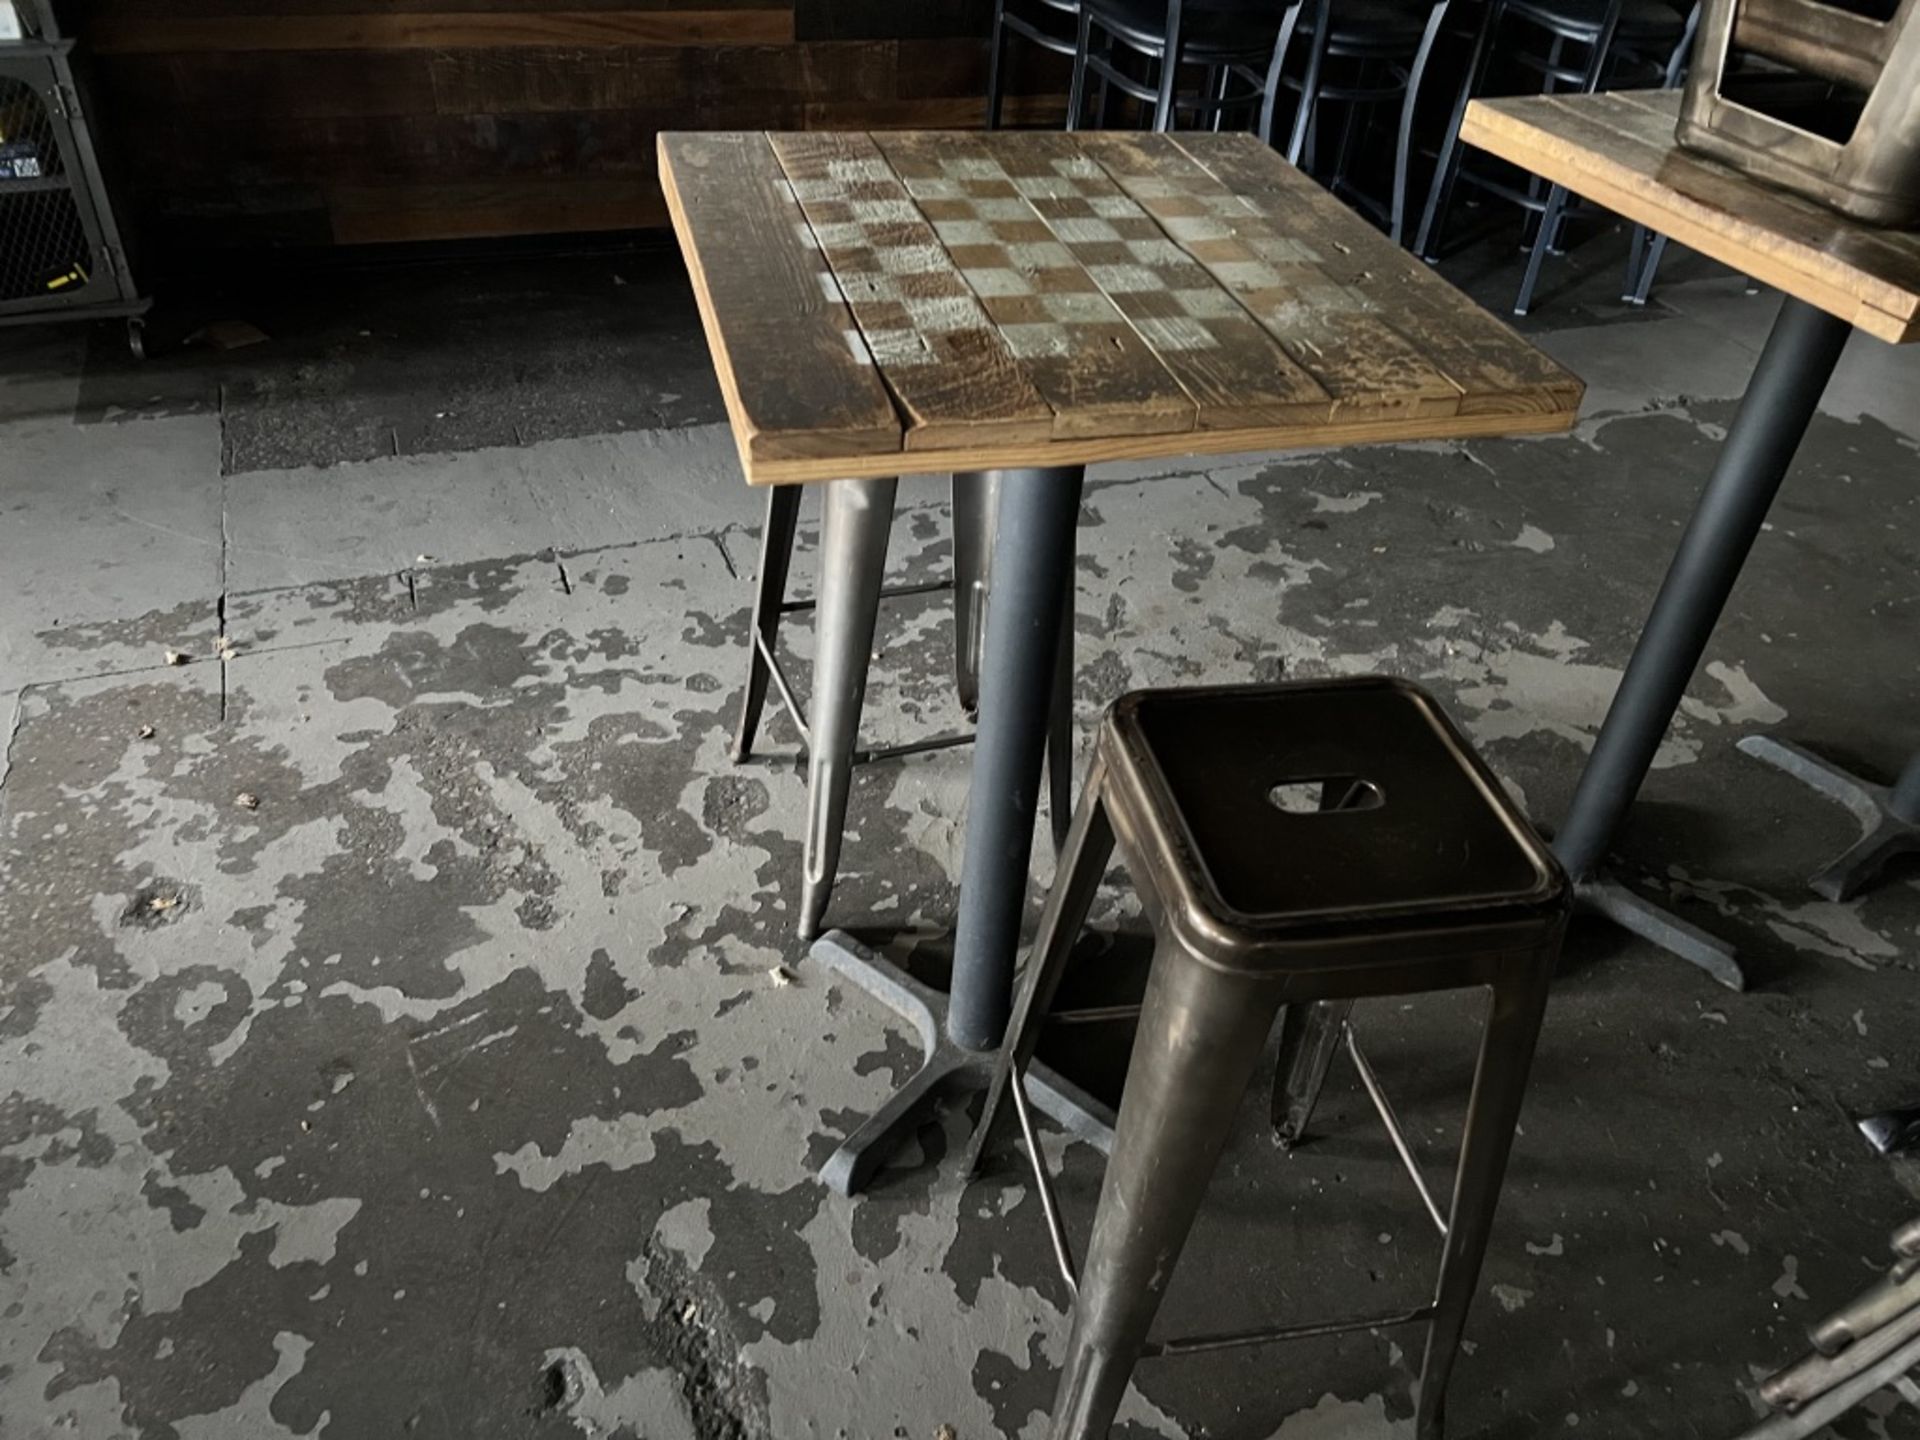 LOT OF: (1) 24" X 24" HI-TOP SQUARE TABLE WITH CHESS/CHECKERS LAYOUT AND (2) METAL STOOLS